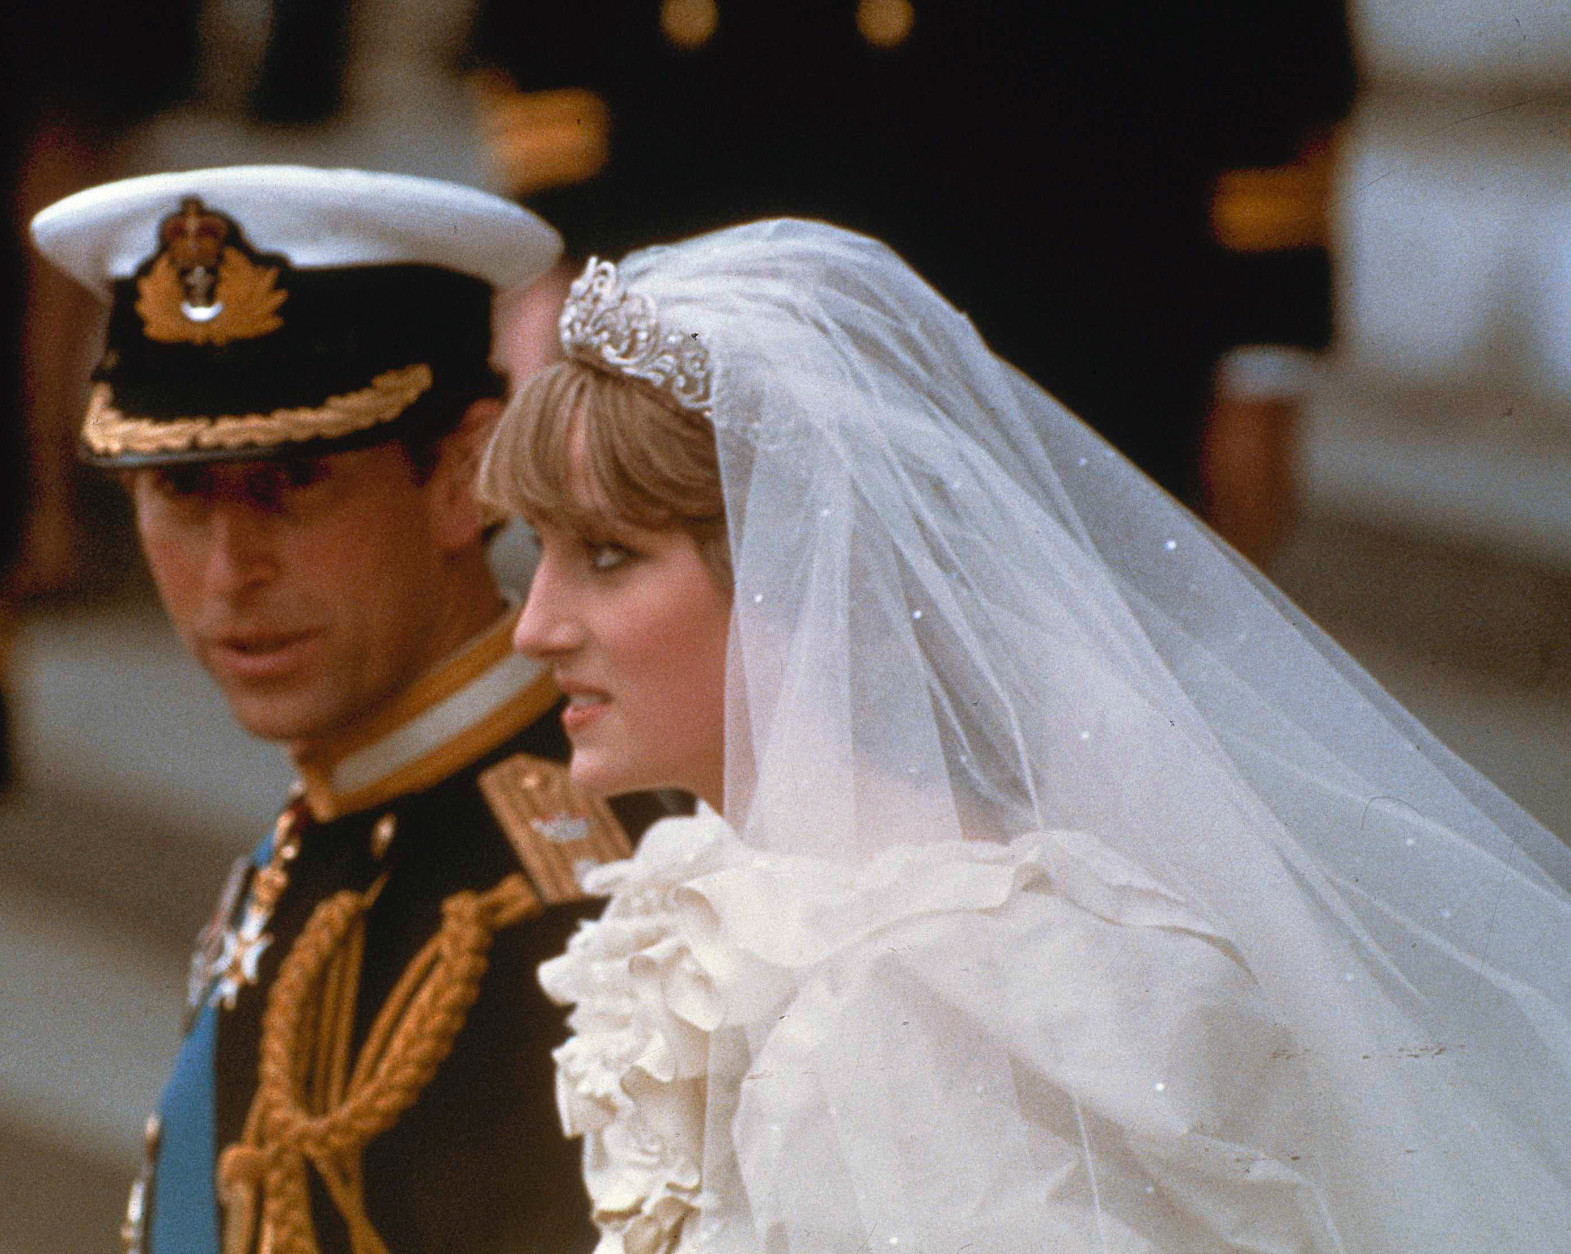 Prince Charles and his bride Diana, Princess of Wales, march down the aisle of St. Paul's Cathedral at the end of their wedding ceremony on July 29, 1981 in London. (AP Photo)